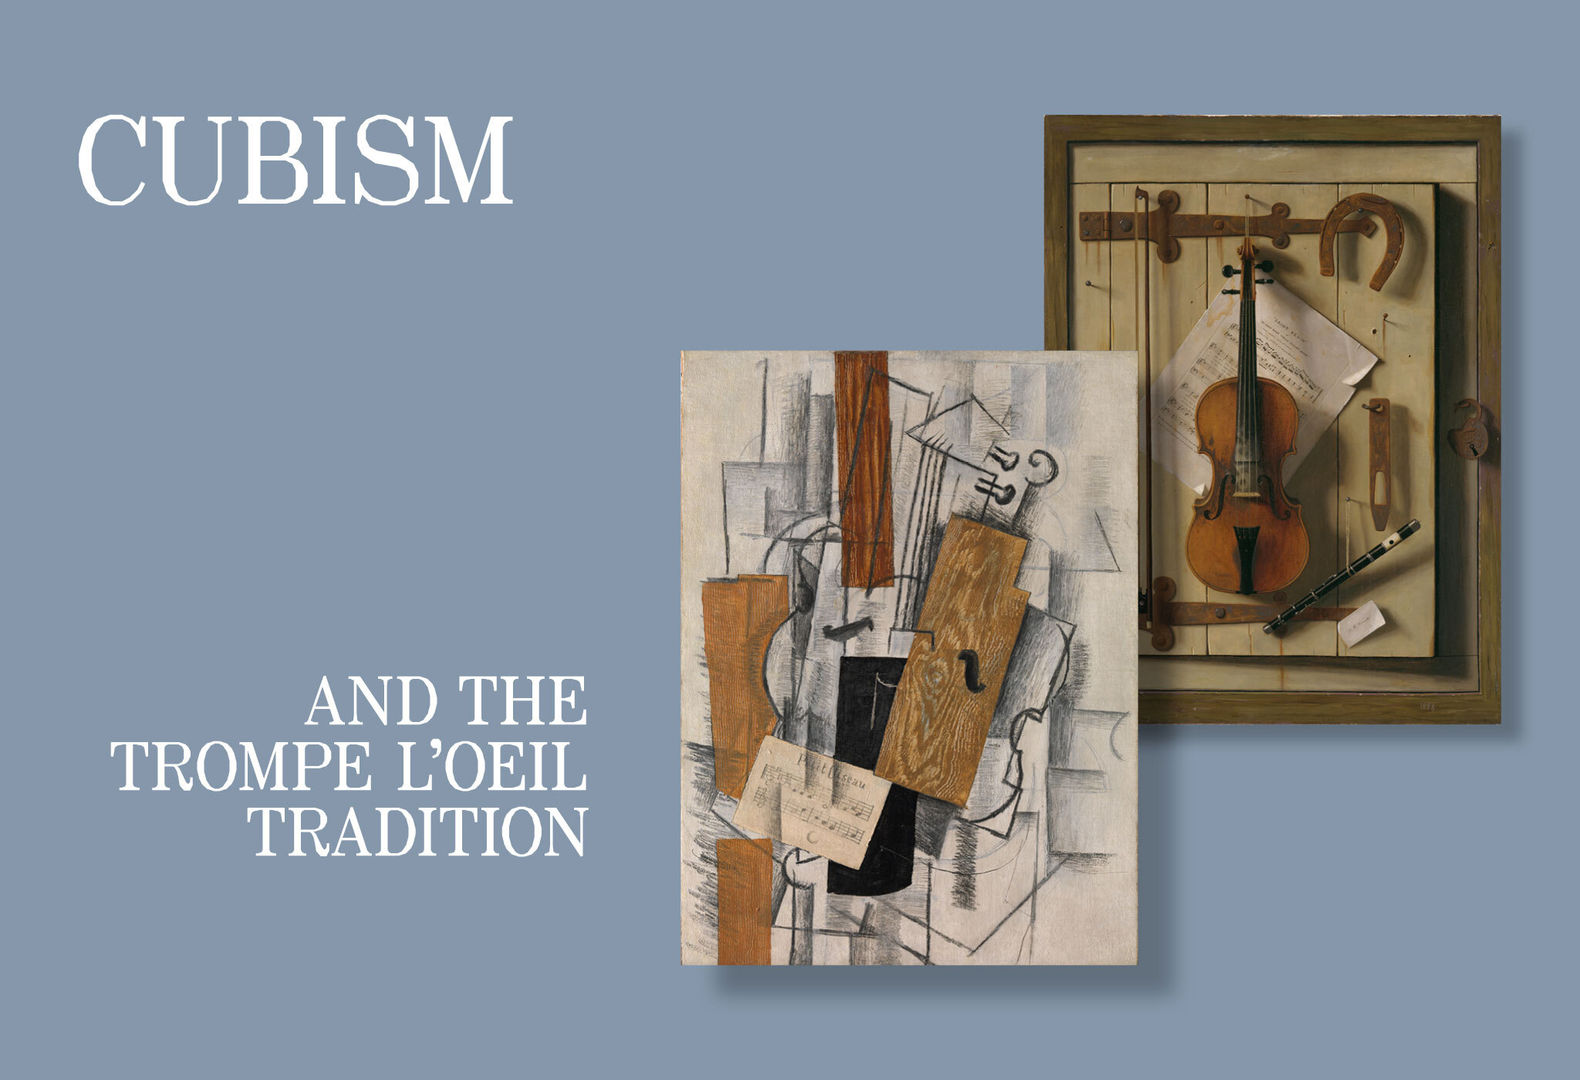 A cubist painting by Georges Braque next to a photorealistic painting by William Michael Harnett, both depicting a violin and sheet music next to the text 